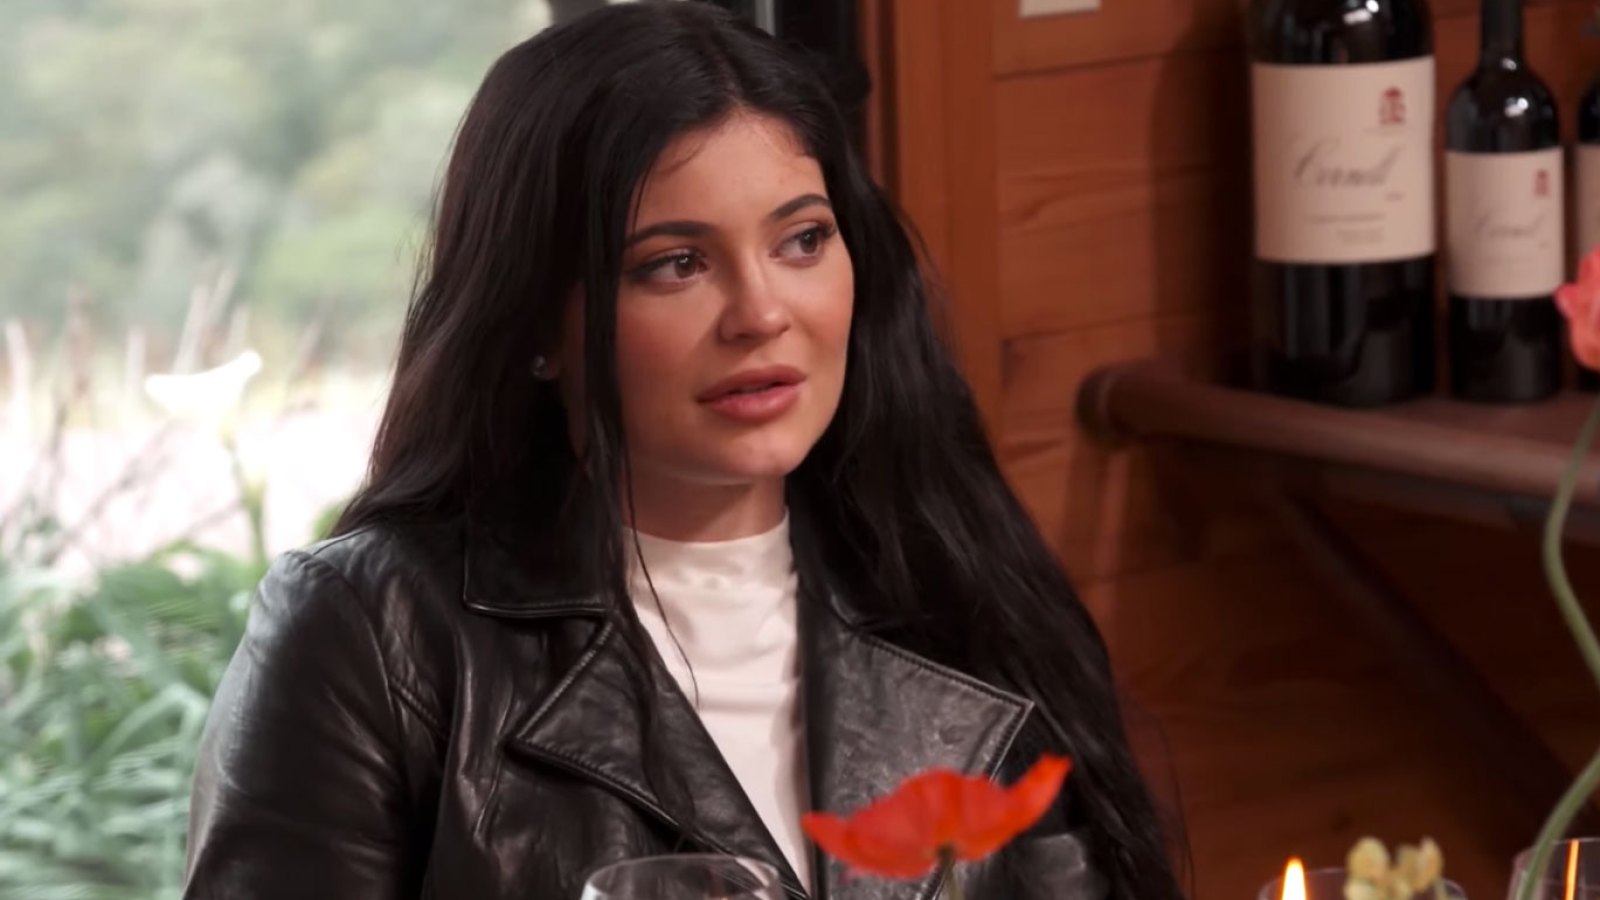 Kylie Jenner Says Jordyn Woods' Cheating Scandal 'Needed to Happen'